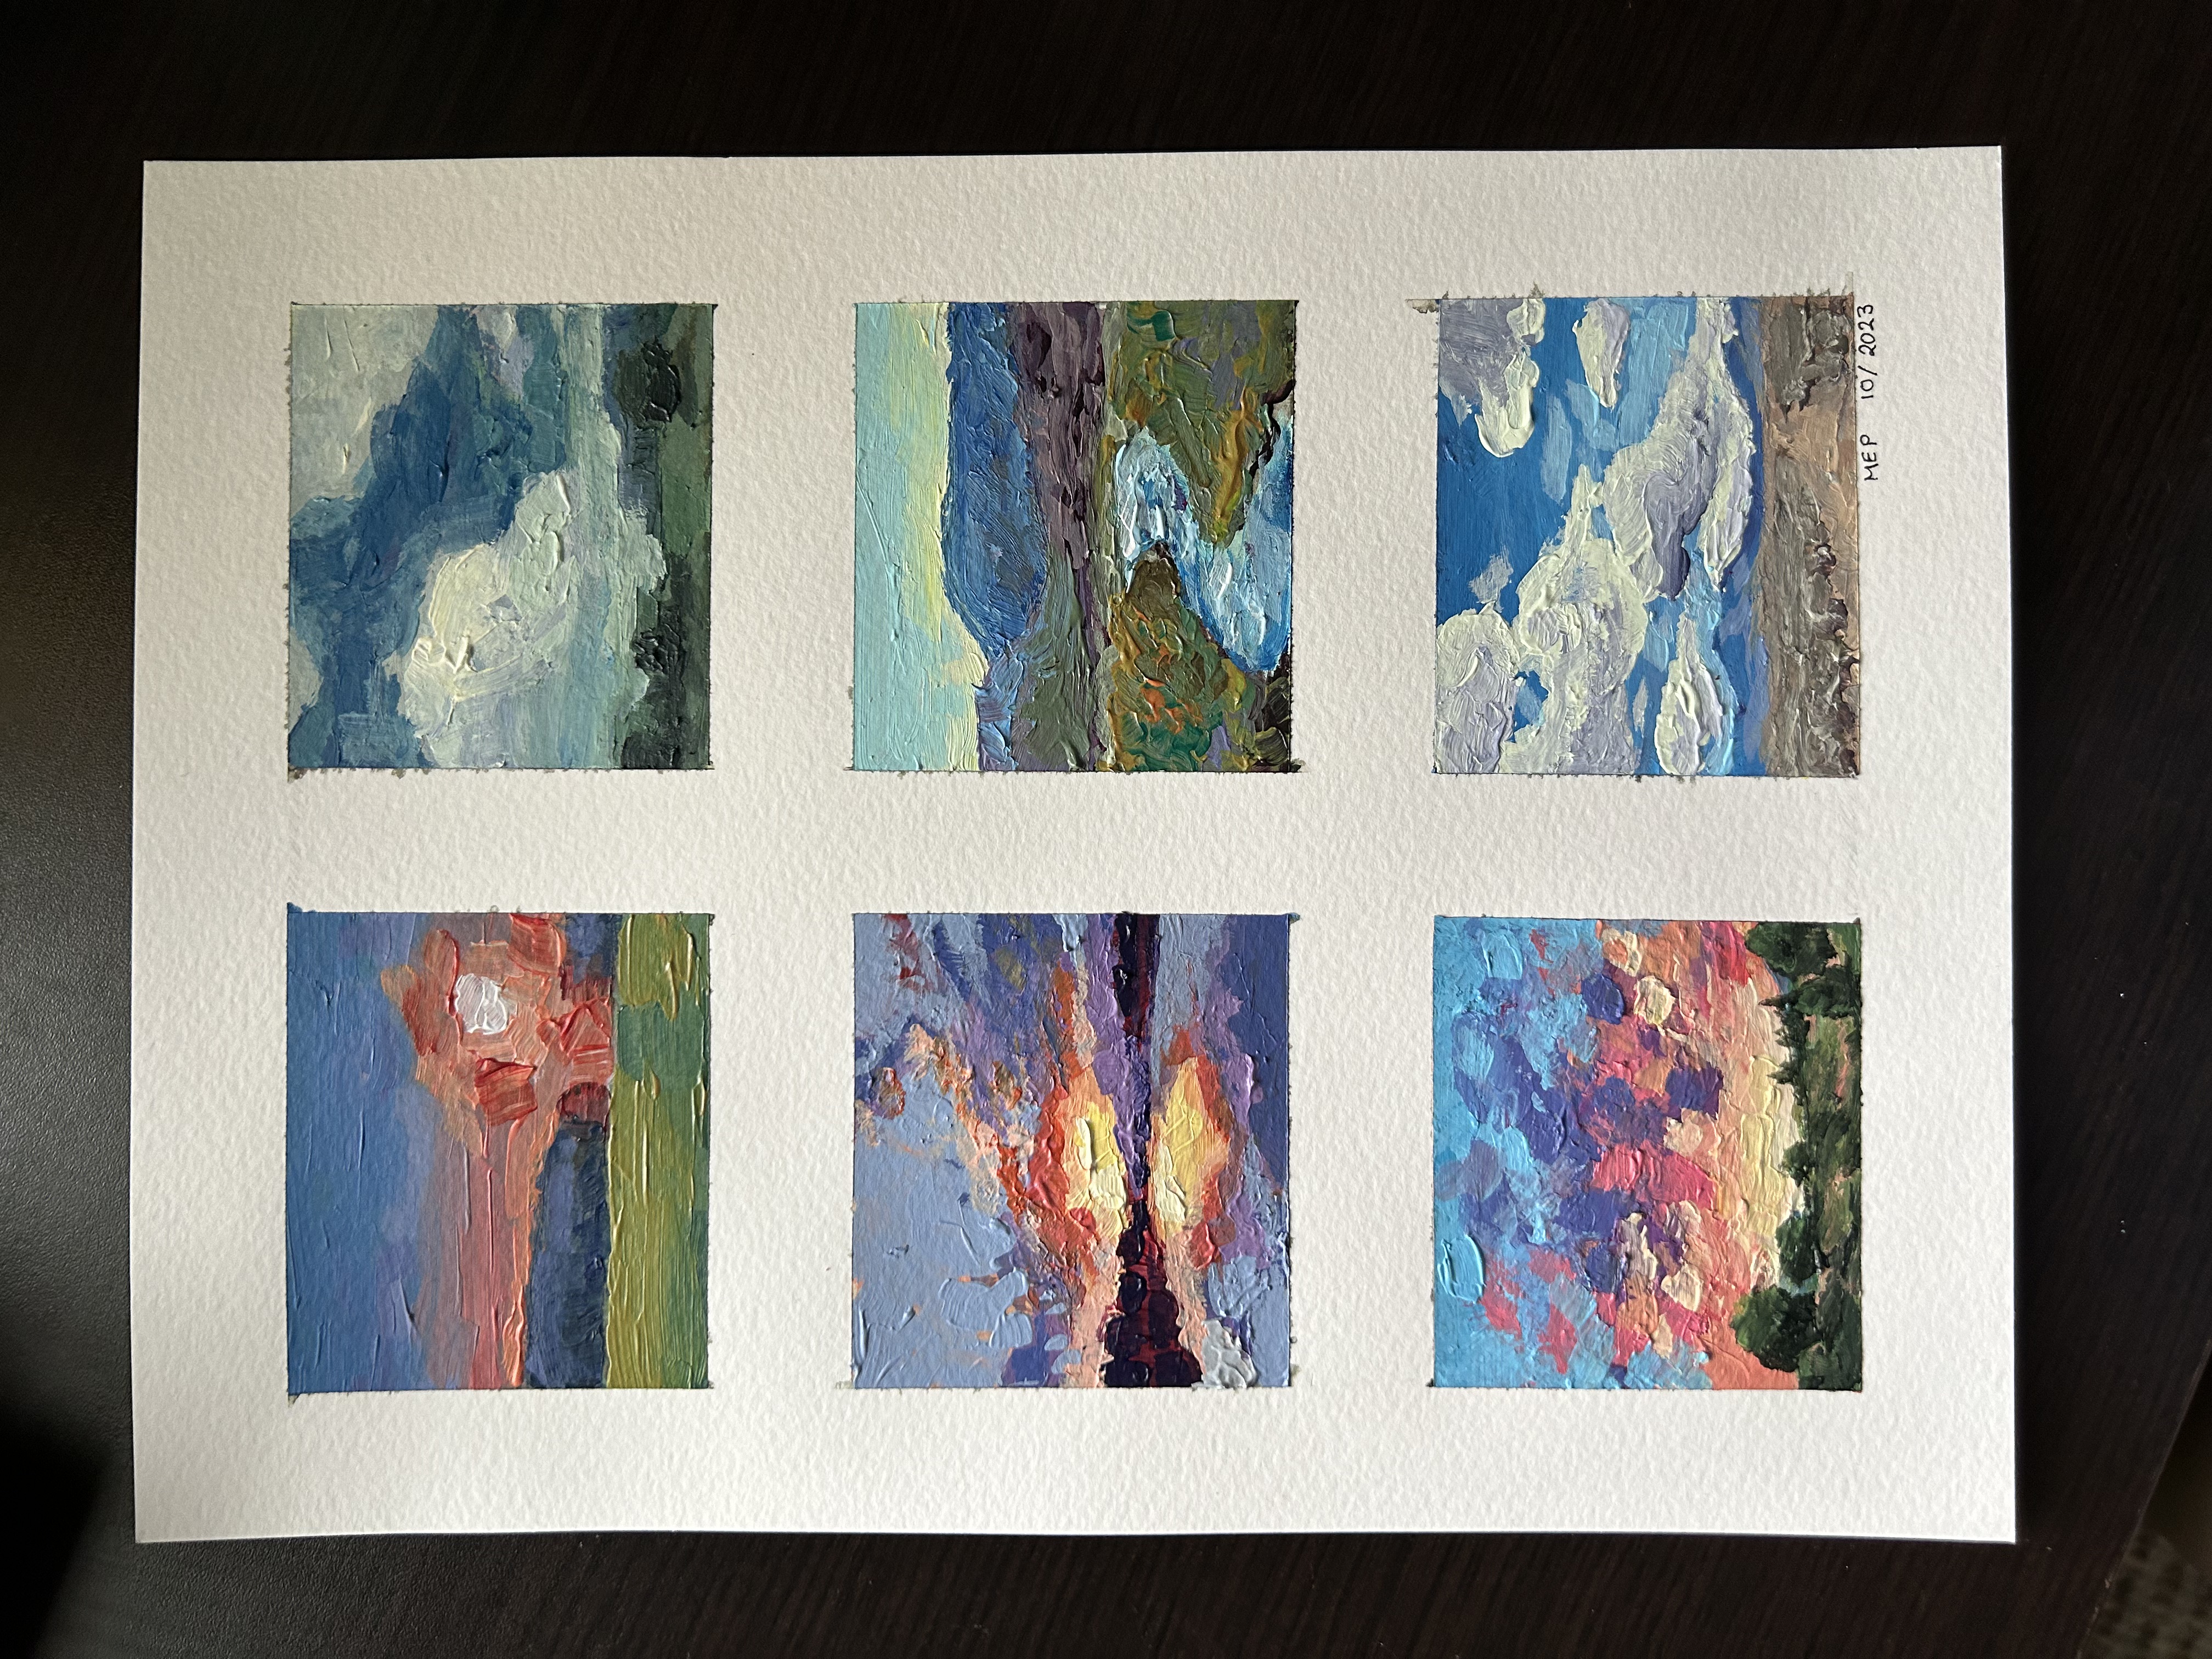 6 acrylic landscape paintings, column on the left is sunsets, column on the right is clouds, all on same framed sheet